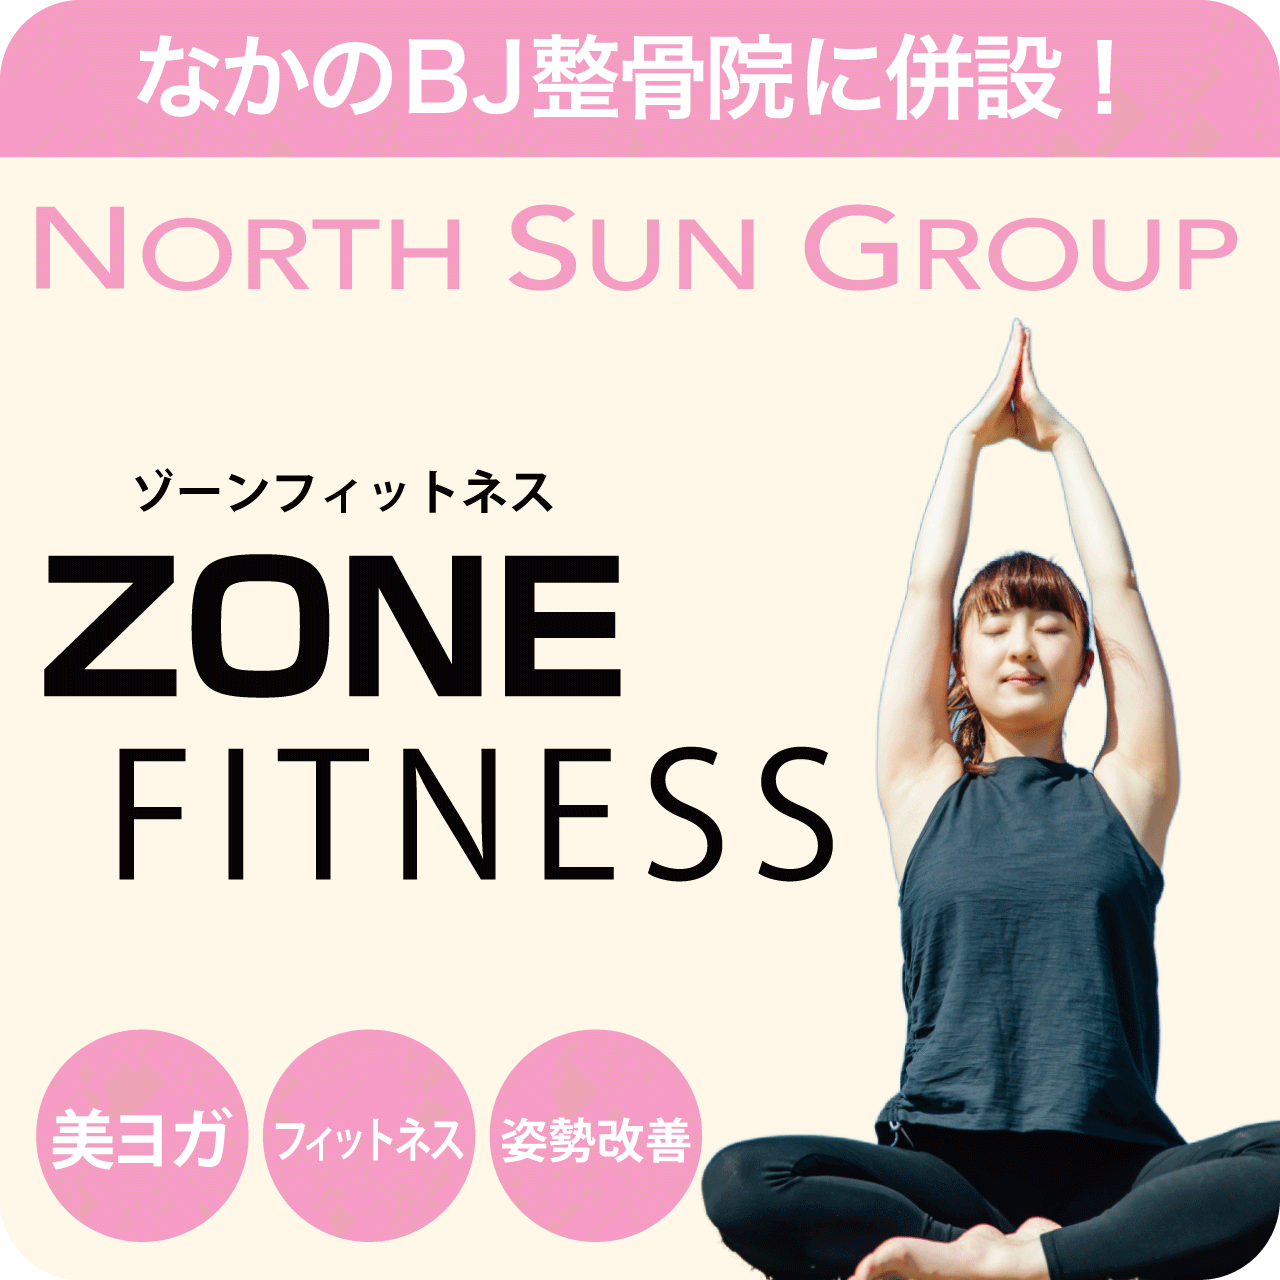 </a>ZONE fitness(ゾーンフィットネス)